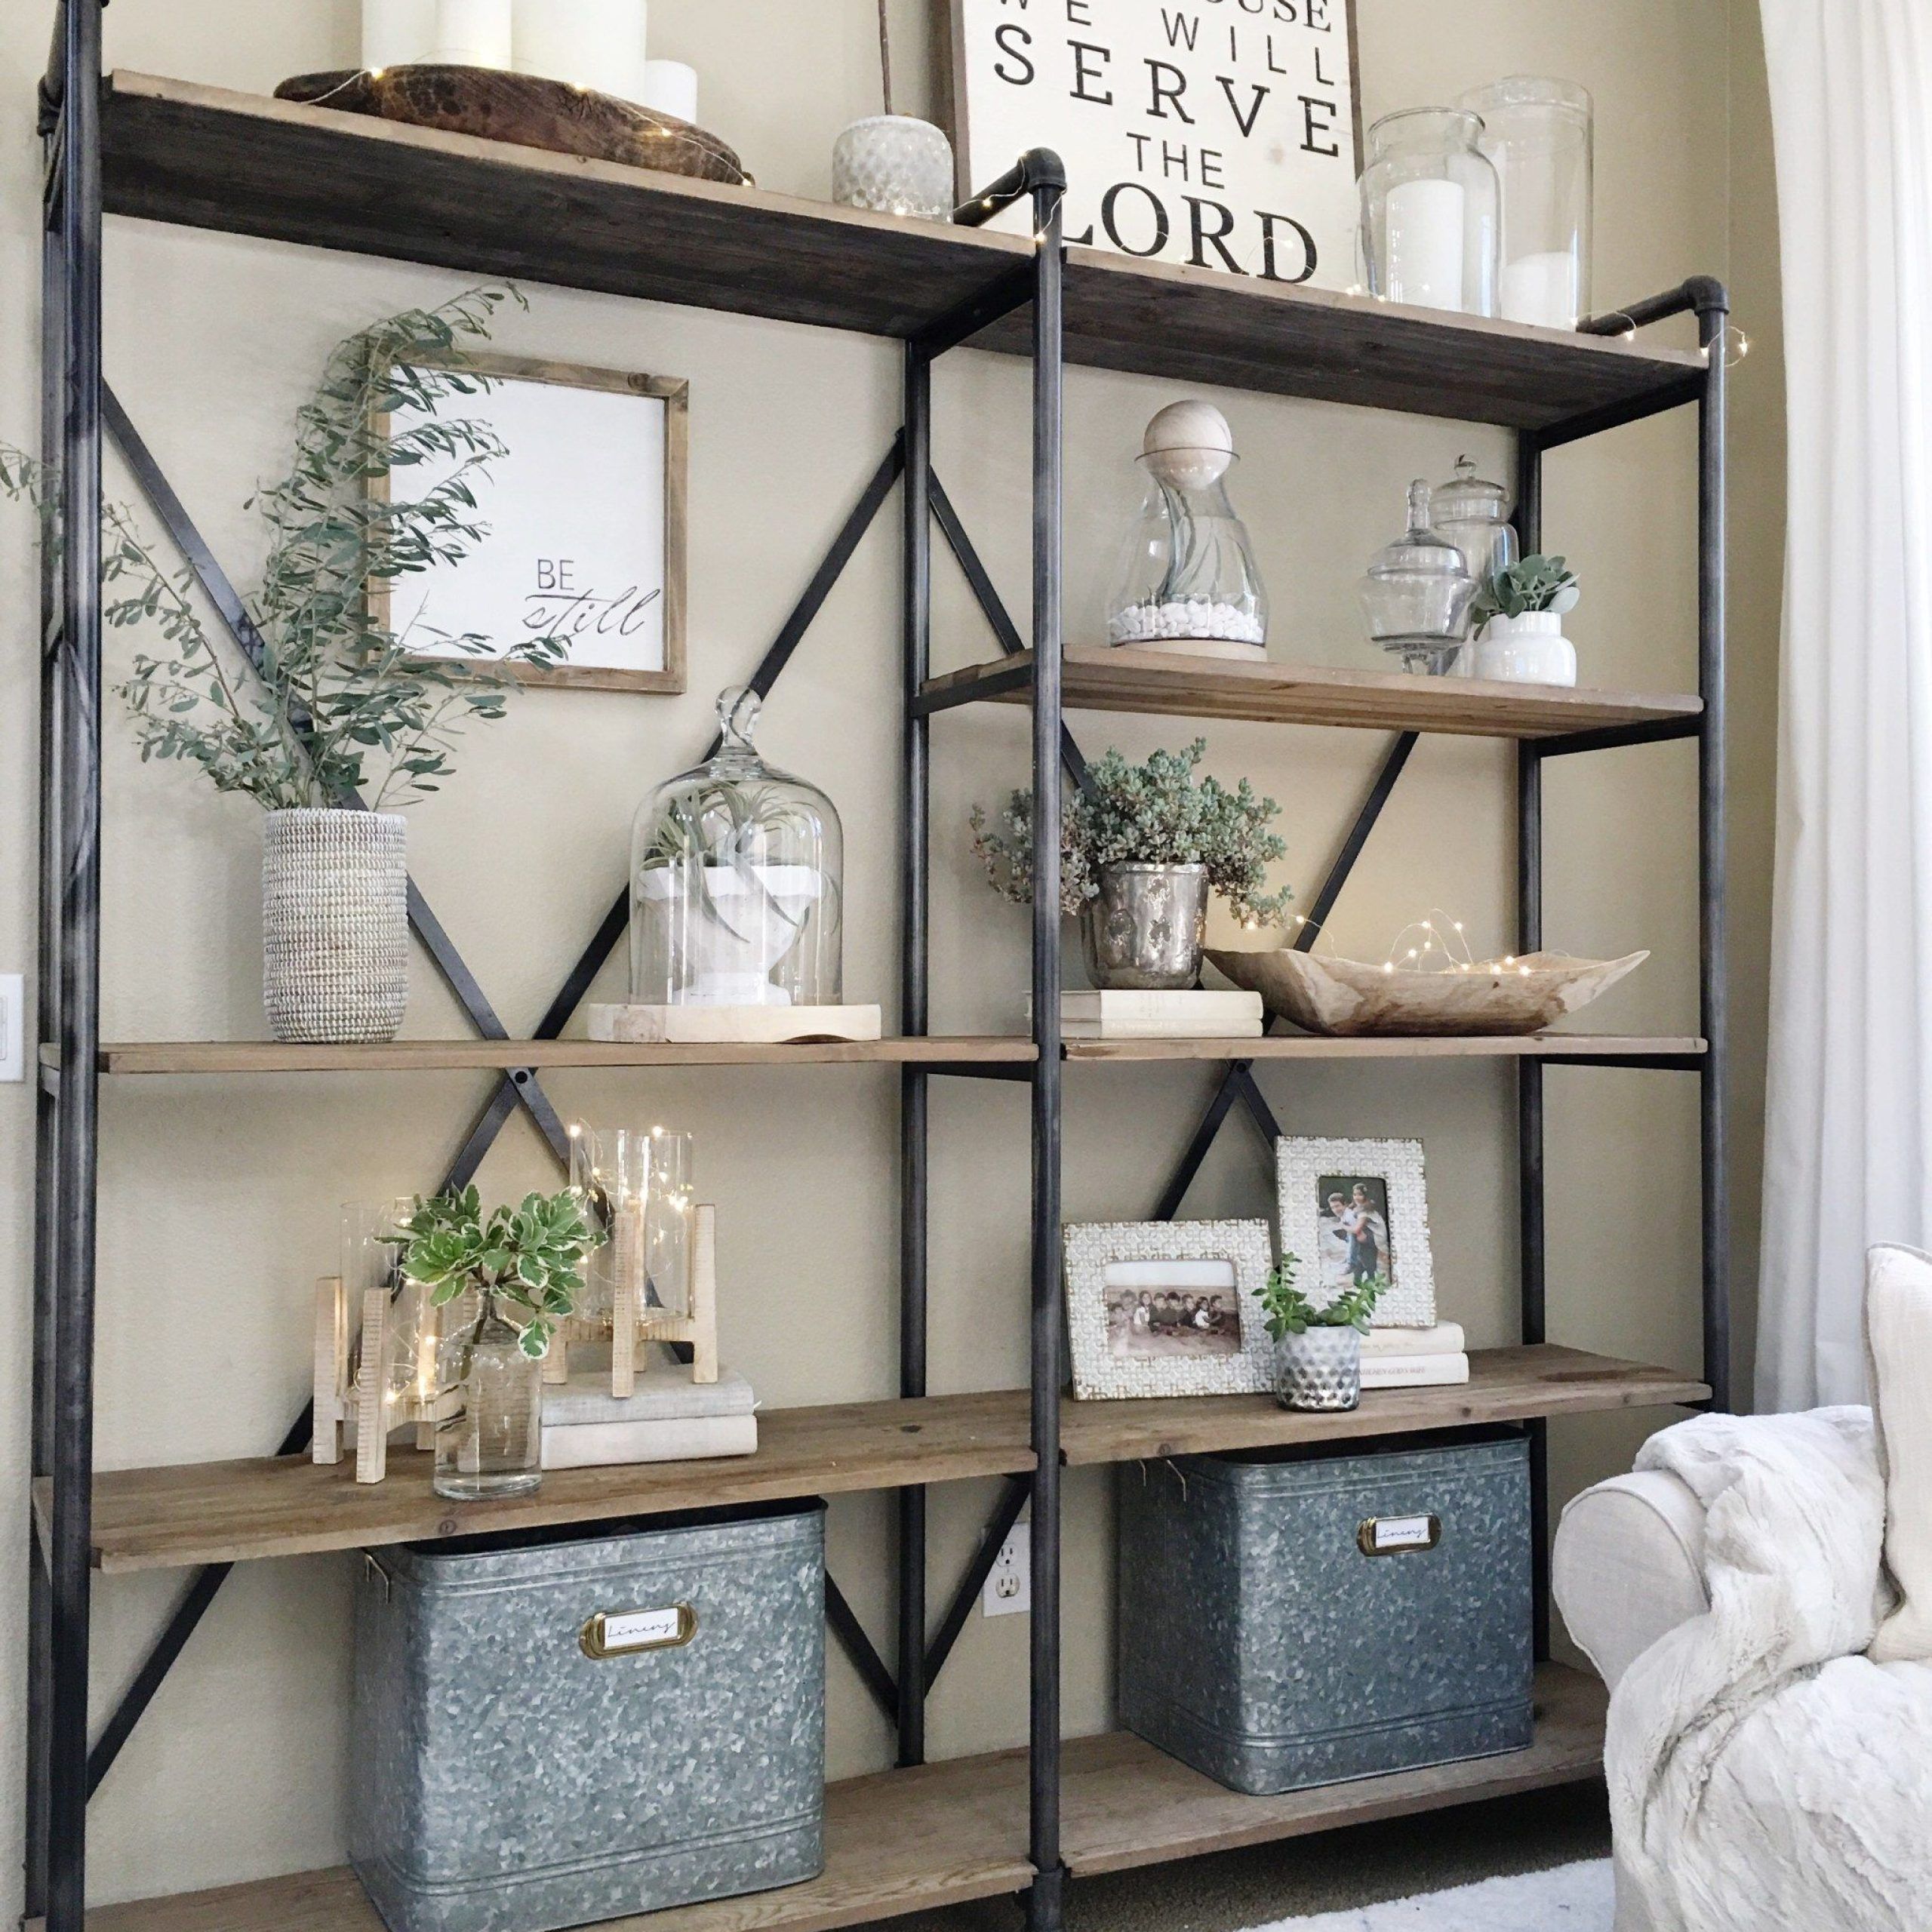 Simplified Shelves | Industrial Shelves | Farm House Living Room Within Farmhouse Stands With Shelves (View 15 of 20)